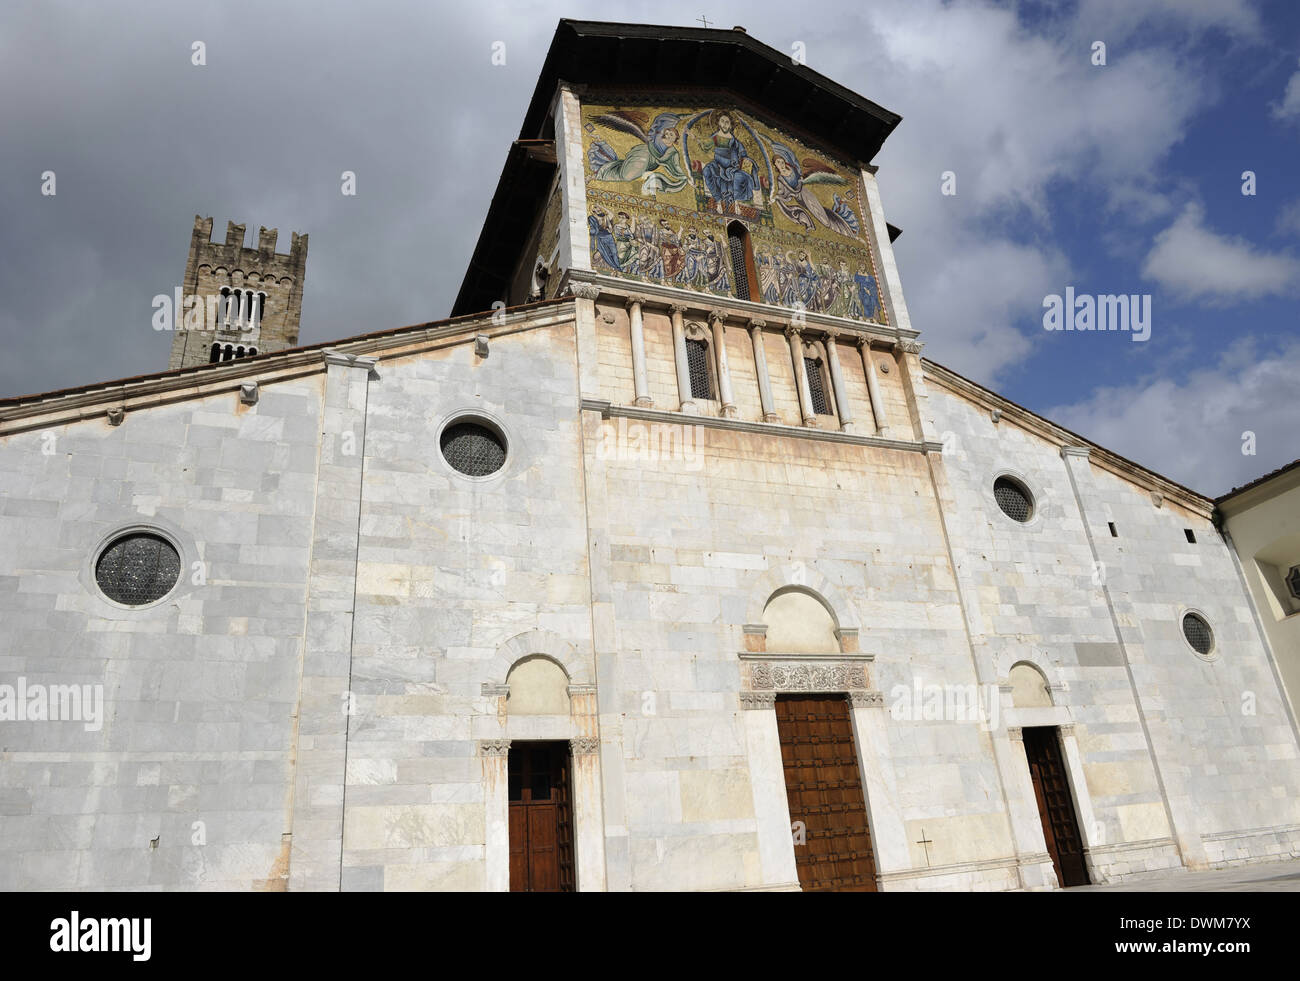 Italy. Lucca. Basilica of St. Frediano. Facade with mosaic depicting The Ascension of Christ by Berlinghiero Berlinghieri. Stock Photo